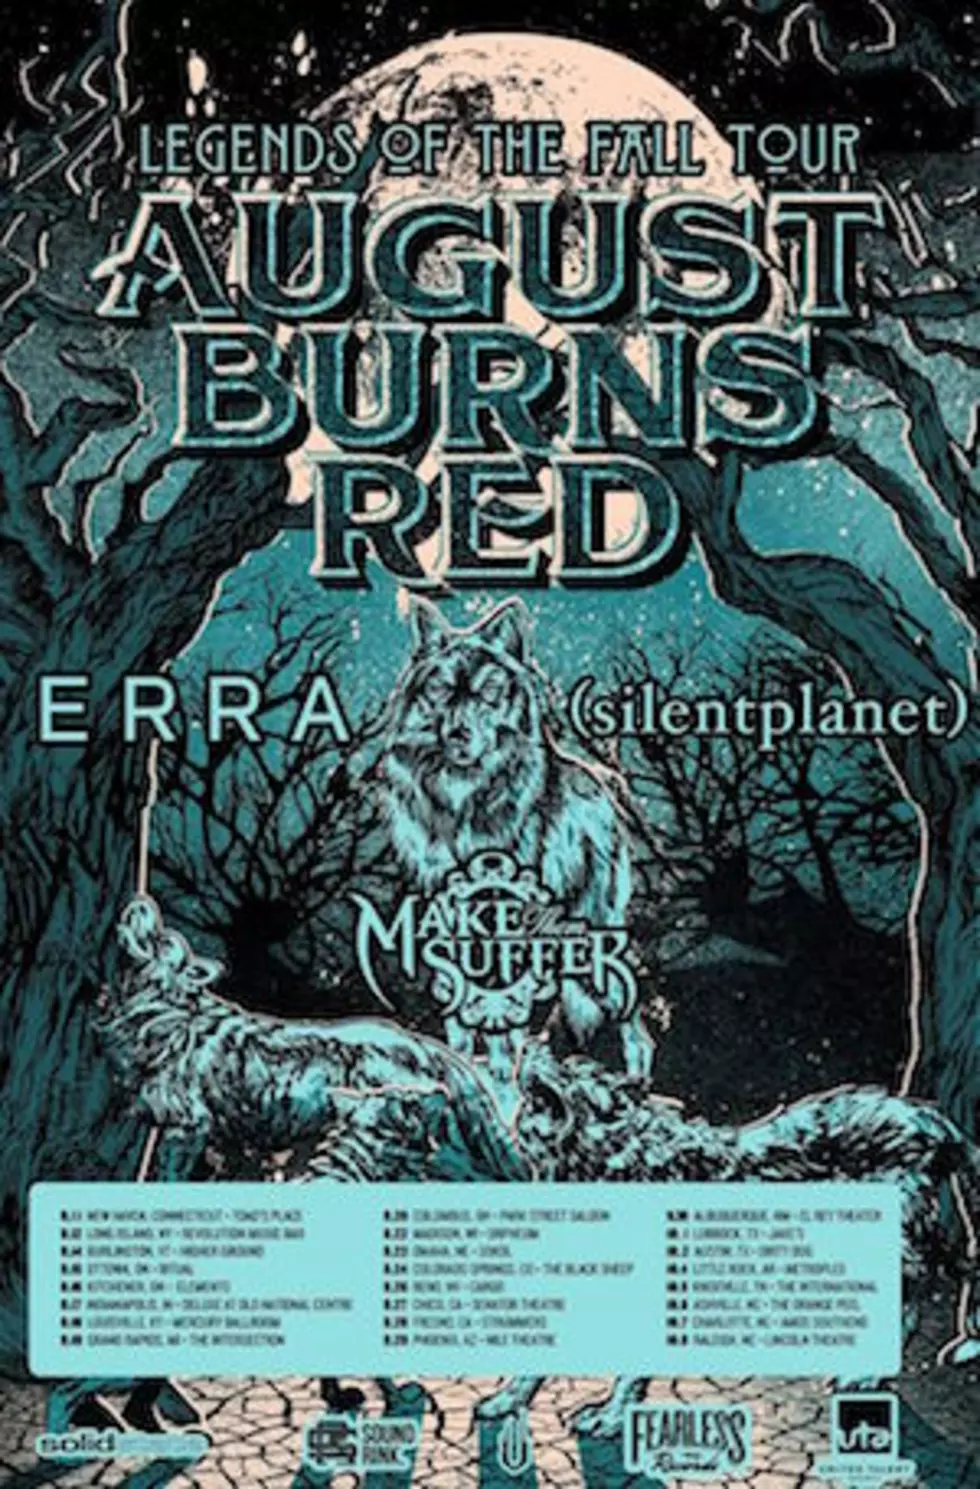 August Burns Red Announce &#8216;Legends of the Fall&#8217; 2016 Tour With Erra + More